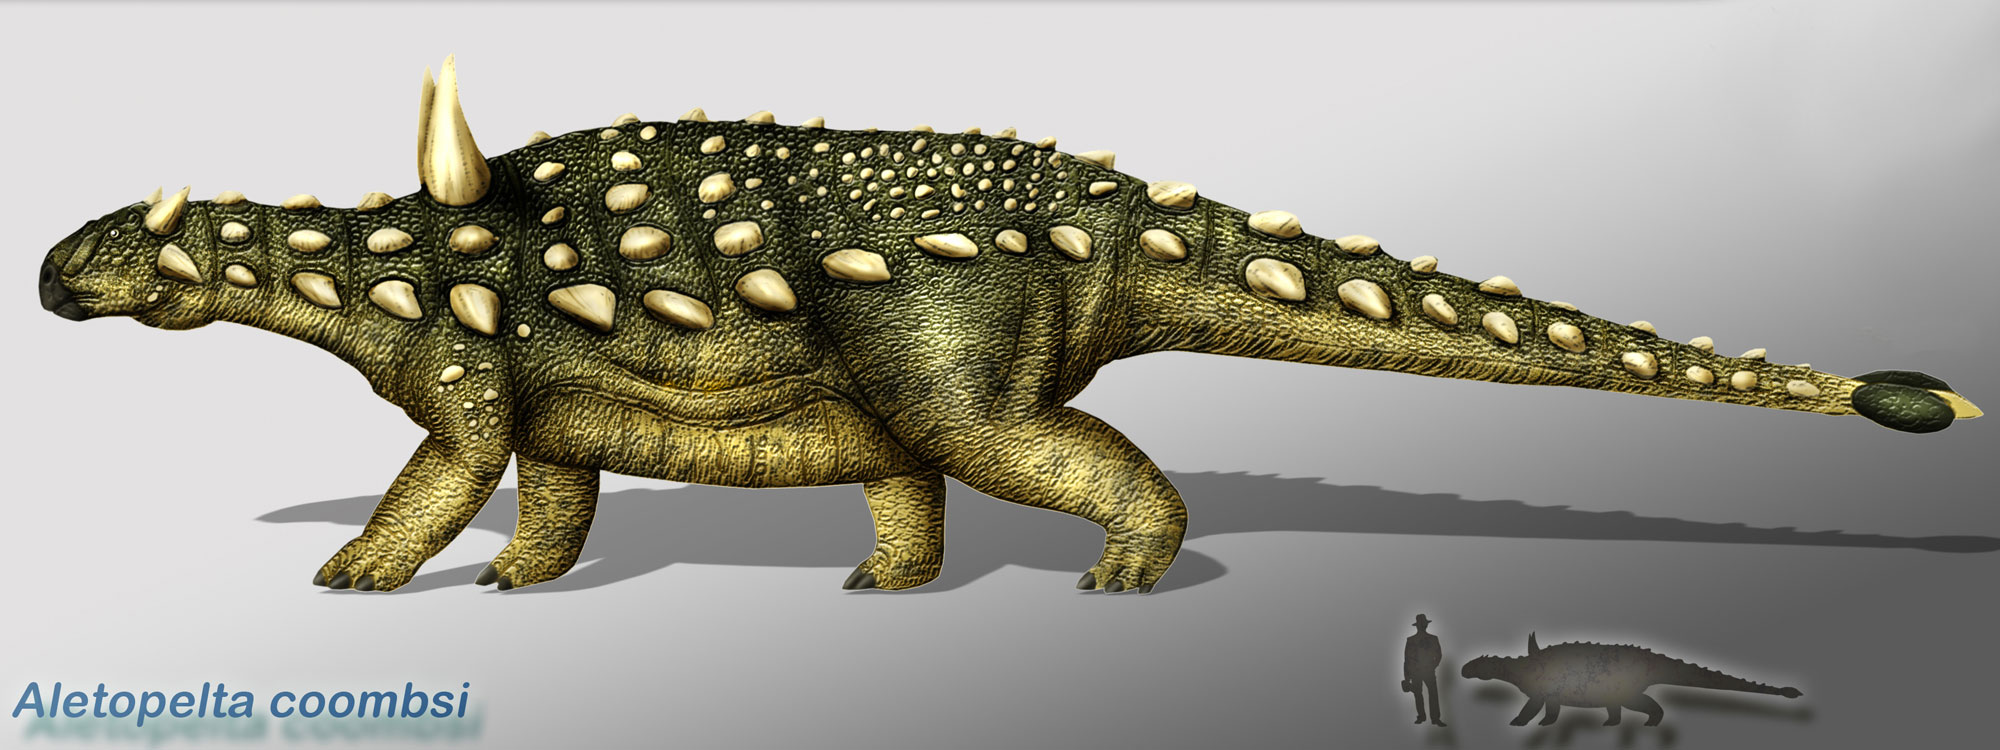 Illustration showing a life reconstruction of Aletopleta, an armored dinosaur from the Cretaceous of California. The dinosaur walks on four short legs, has a longish neck ending in a small head with a break-like mount, and a long tail. The back of the animal has rows of large spikes and the tail ends in a club. The dinosaur was about half as tall as a grown man, as indicated by small silhouettes in the corner of the illustration.